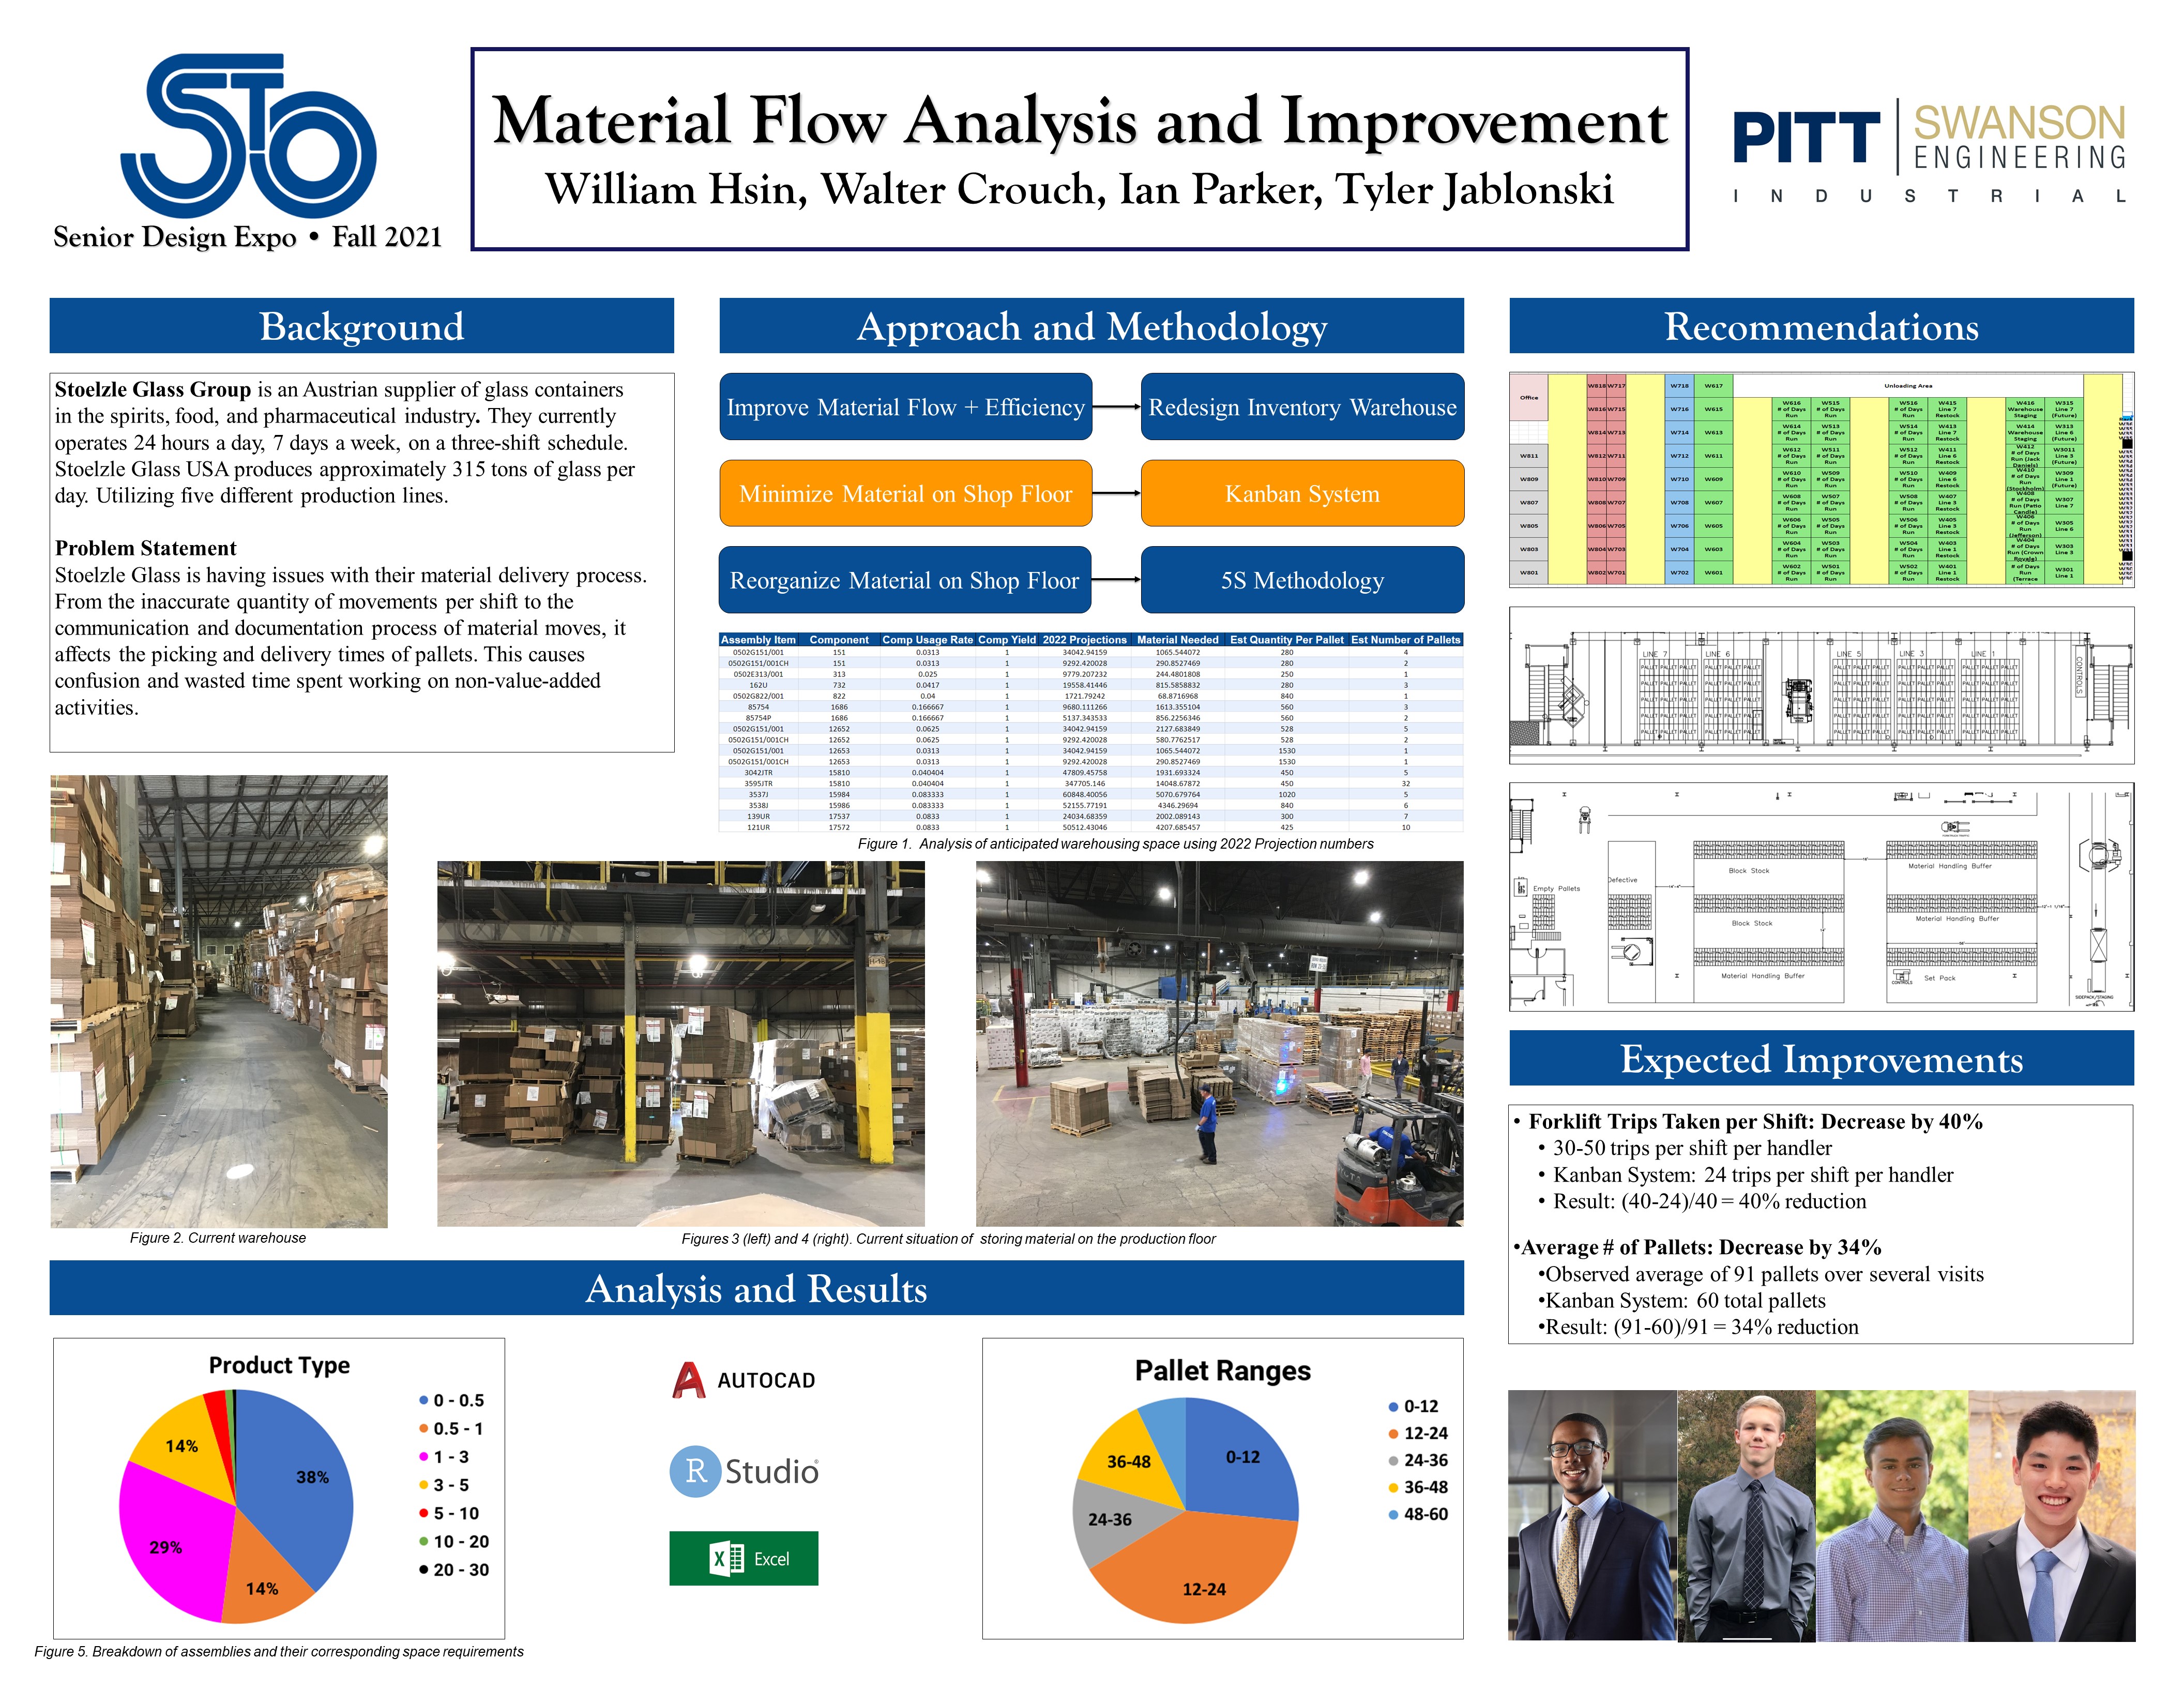 Senior Design Project - Material Flow Analysis and Improvement